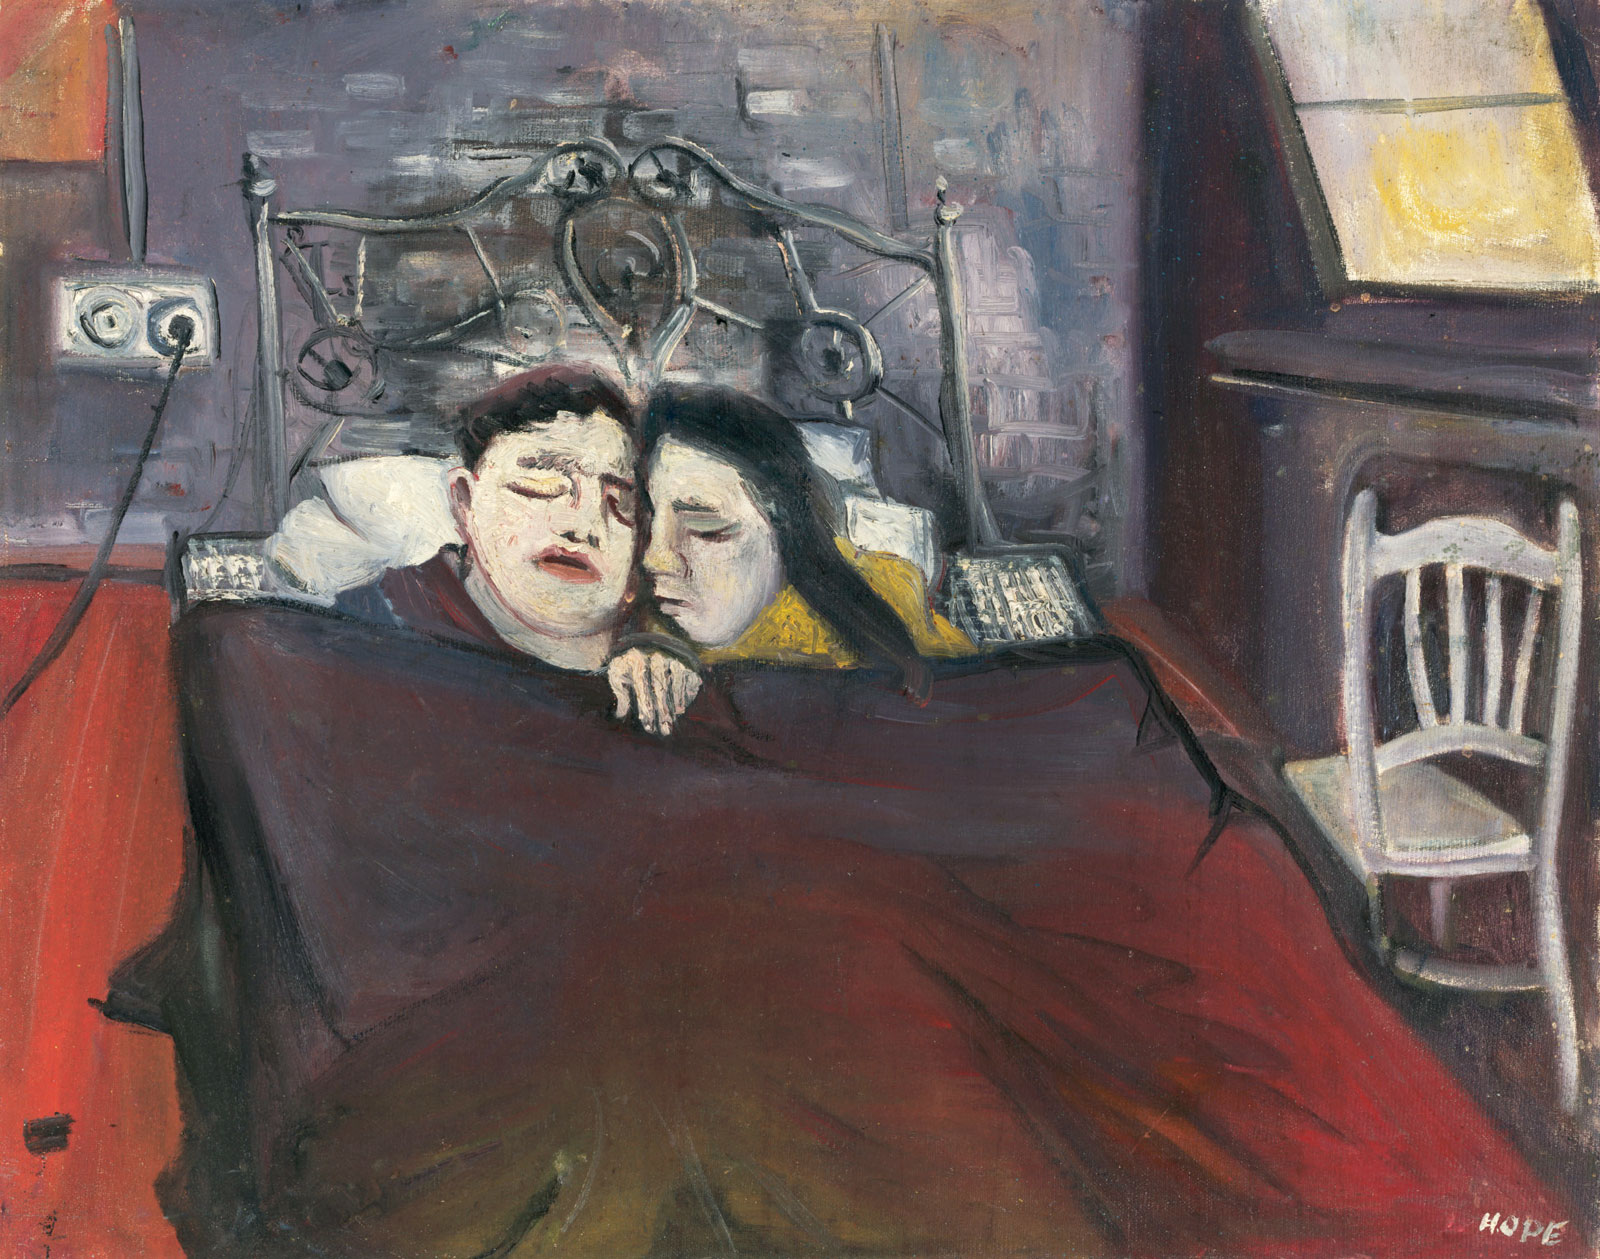 ©Laurence Hope, *Lovers in bed*, 1952. National Gallery of Australia